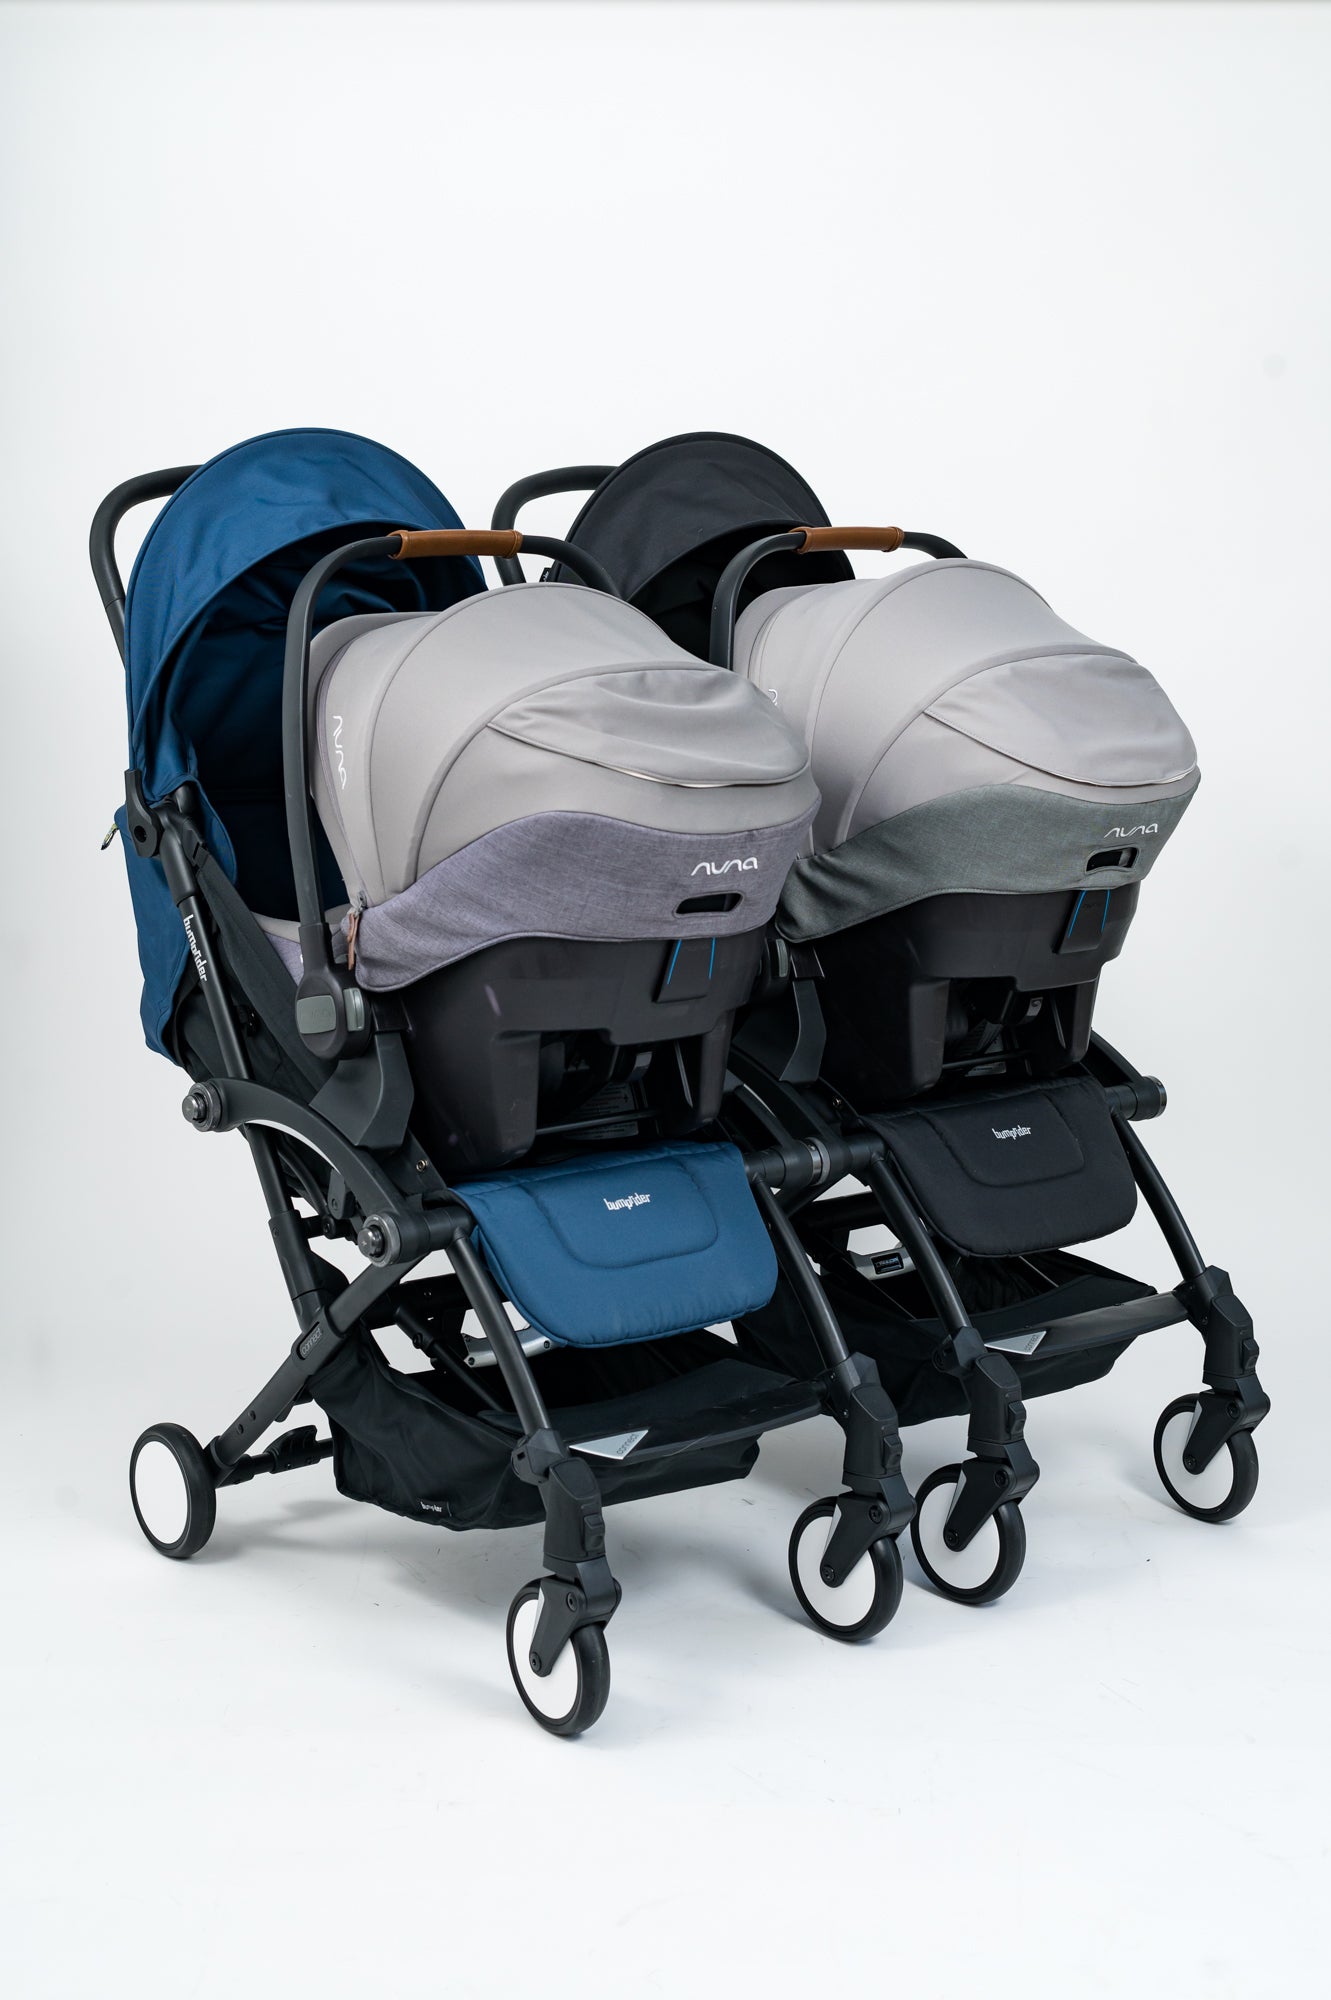 Bumprider Connect 3 in Navy and Black with two Car seats